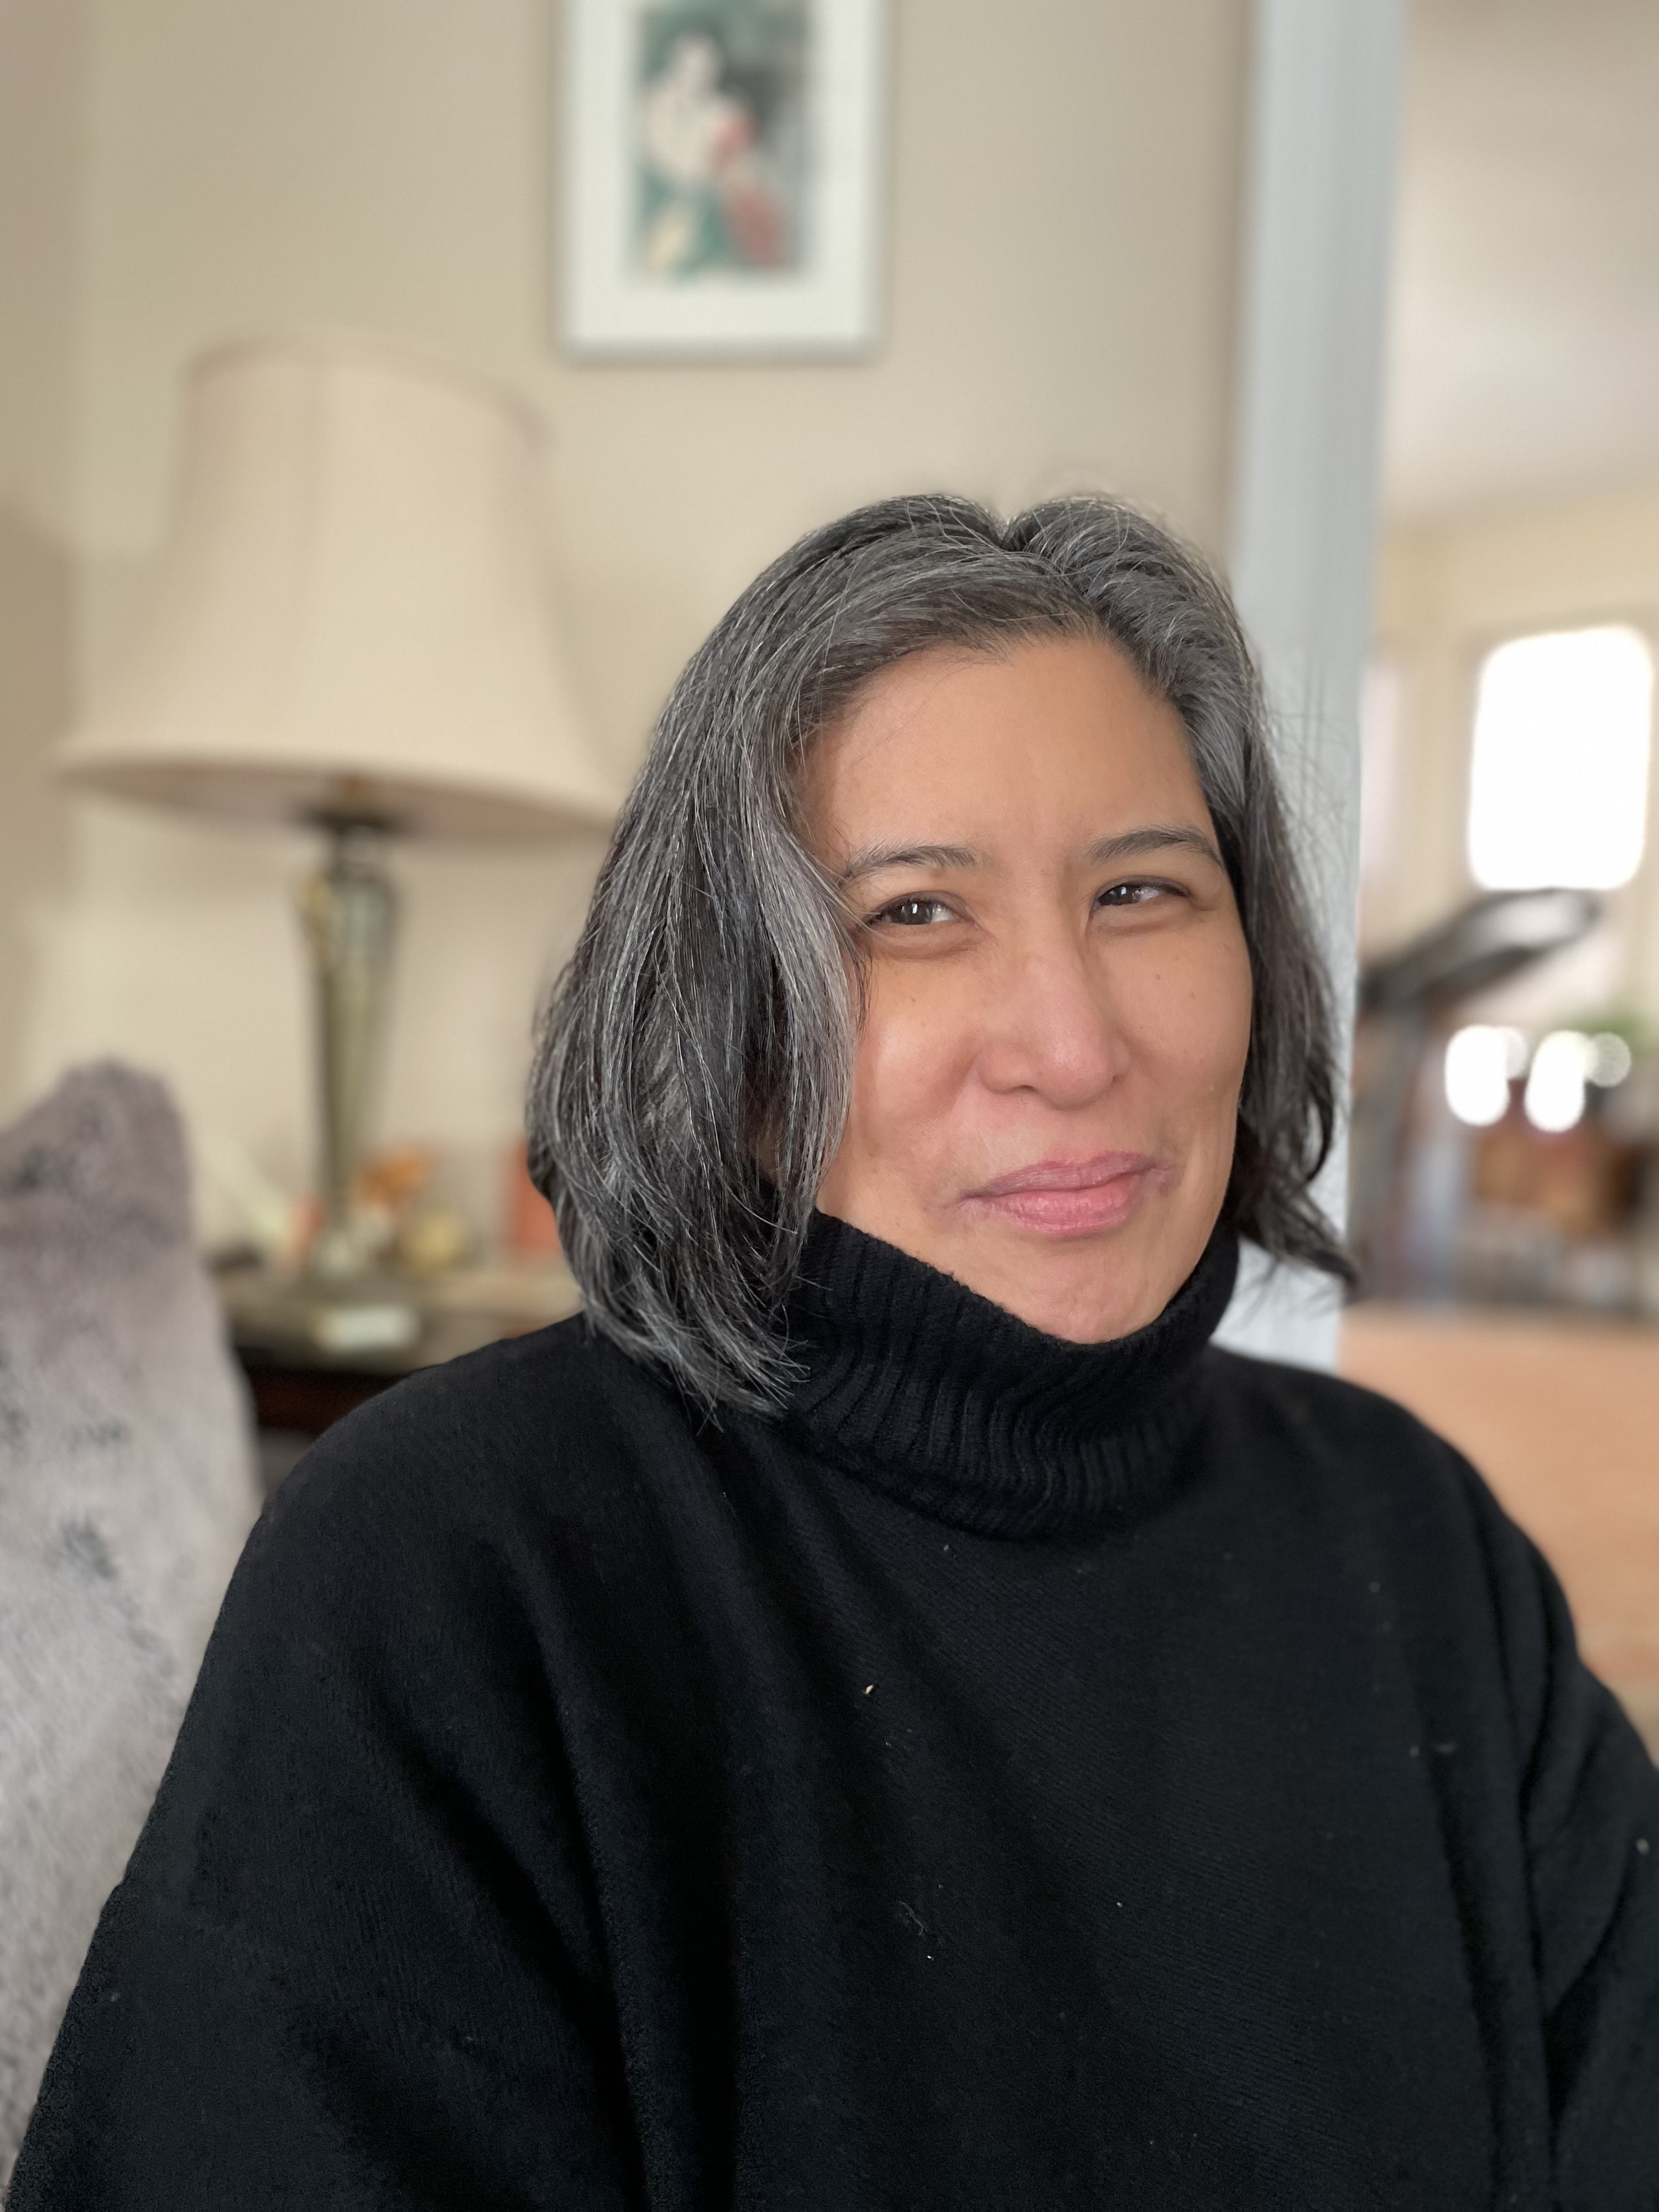 In a portrait-oriented photograph, Kimberly appears cropped from the midriff up, wearing a black sweater and looking at the camera and smiling.